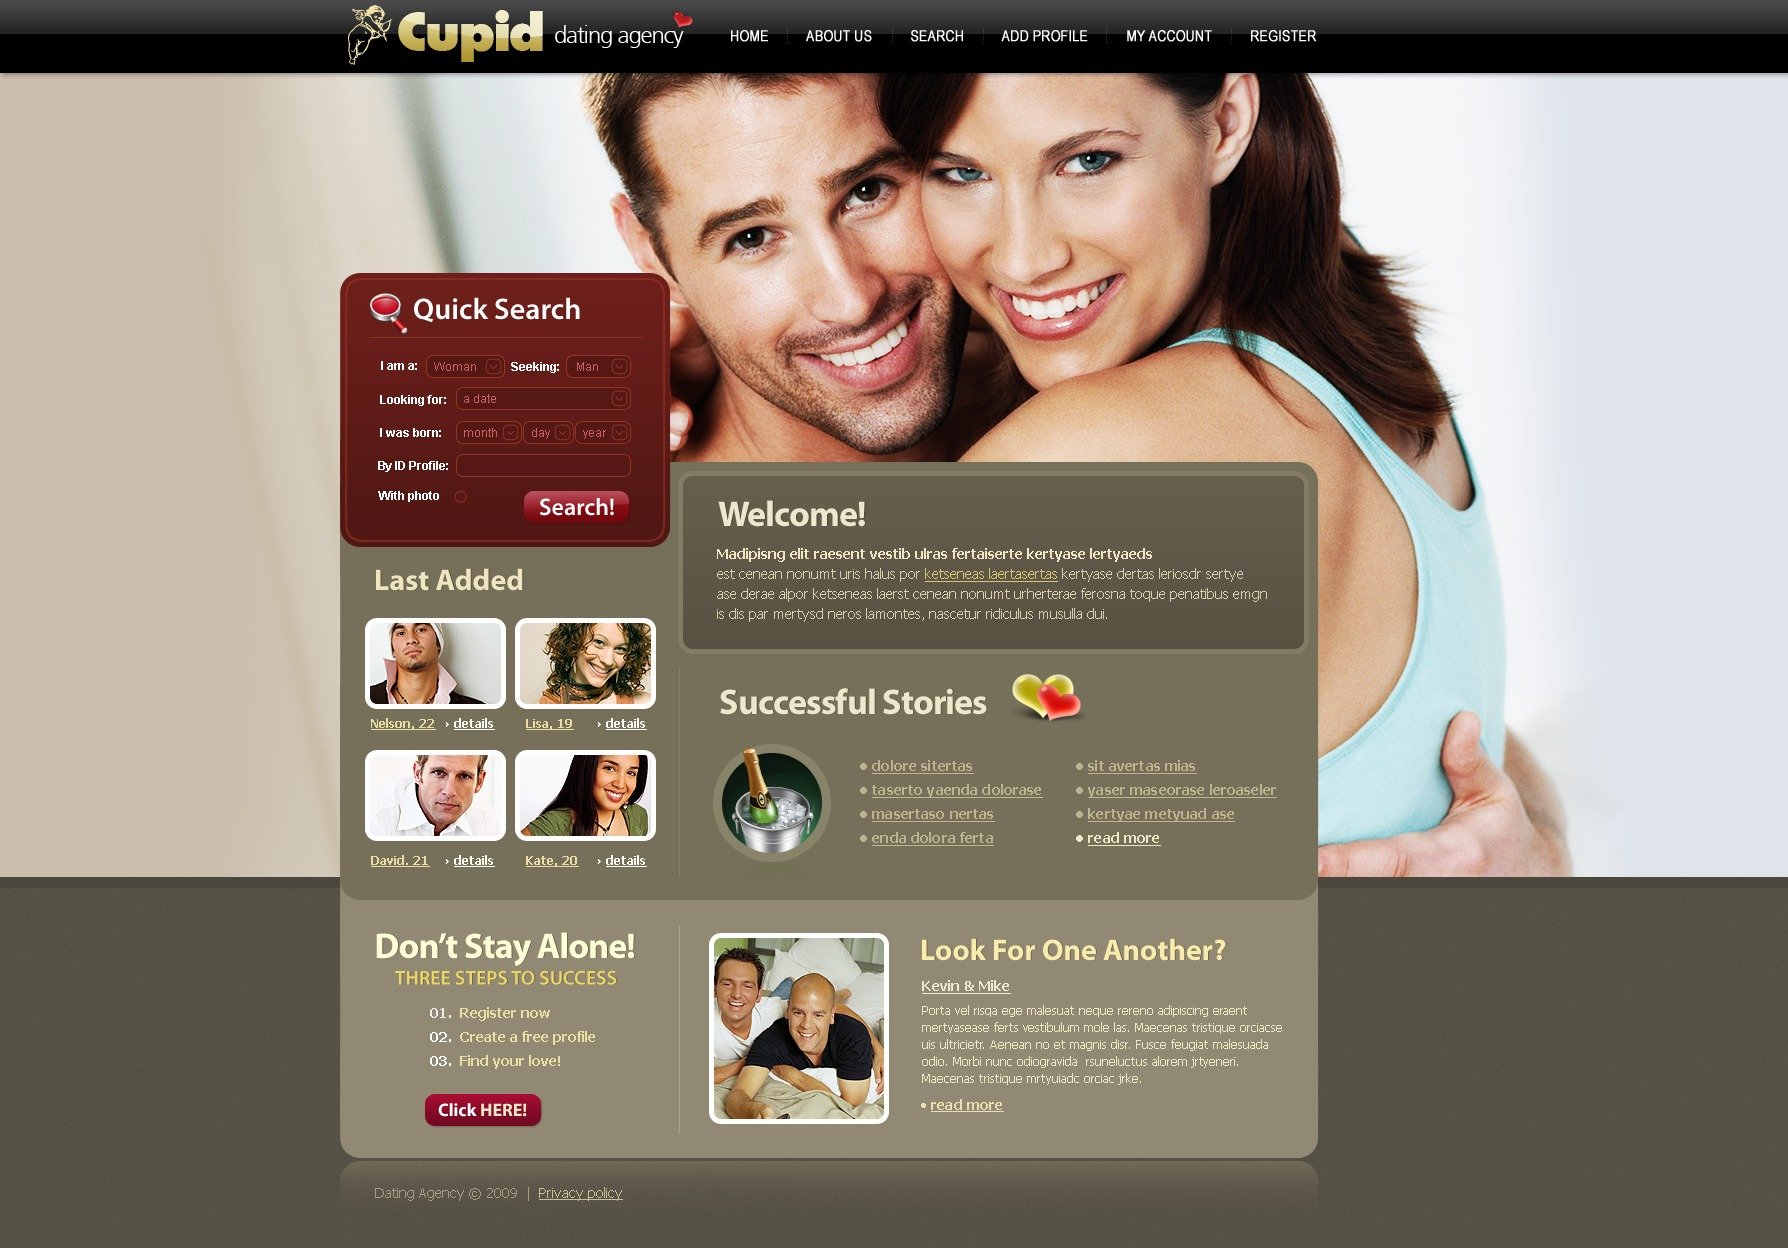 Your Guide to Web Based Dating Results - Simple Tips for First-Timers